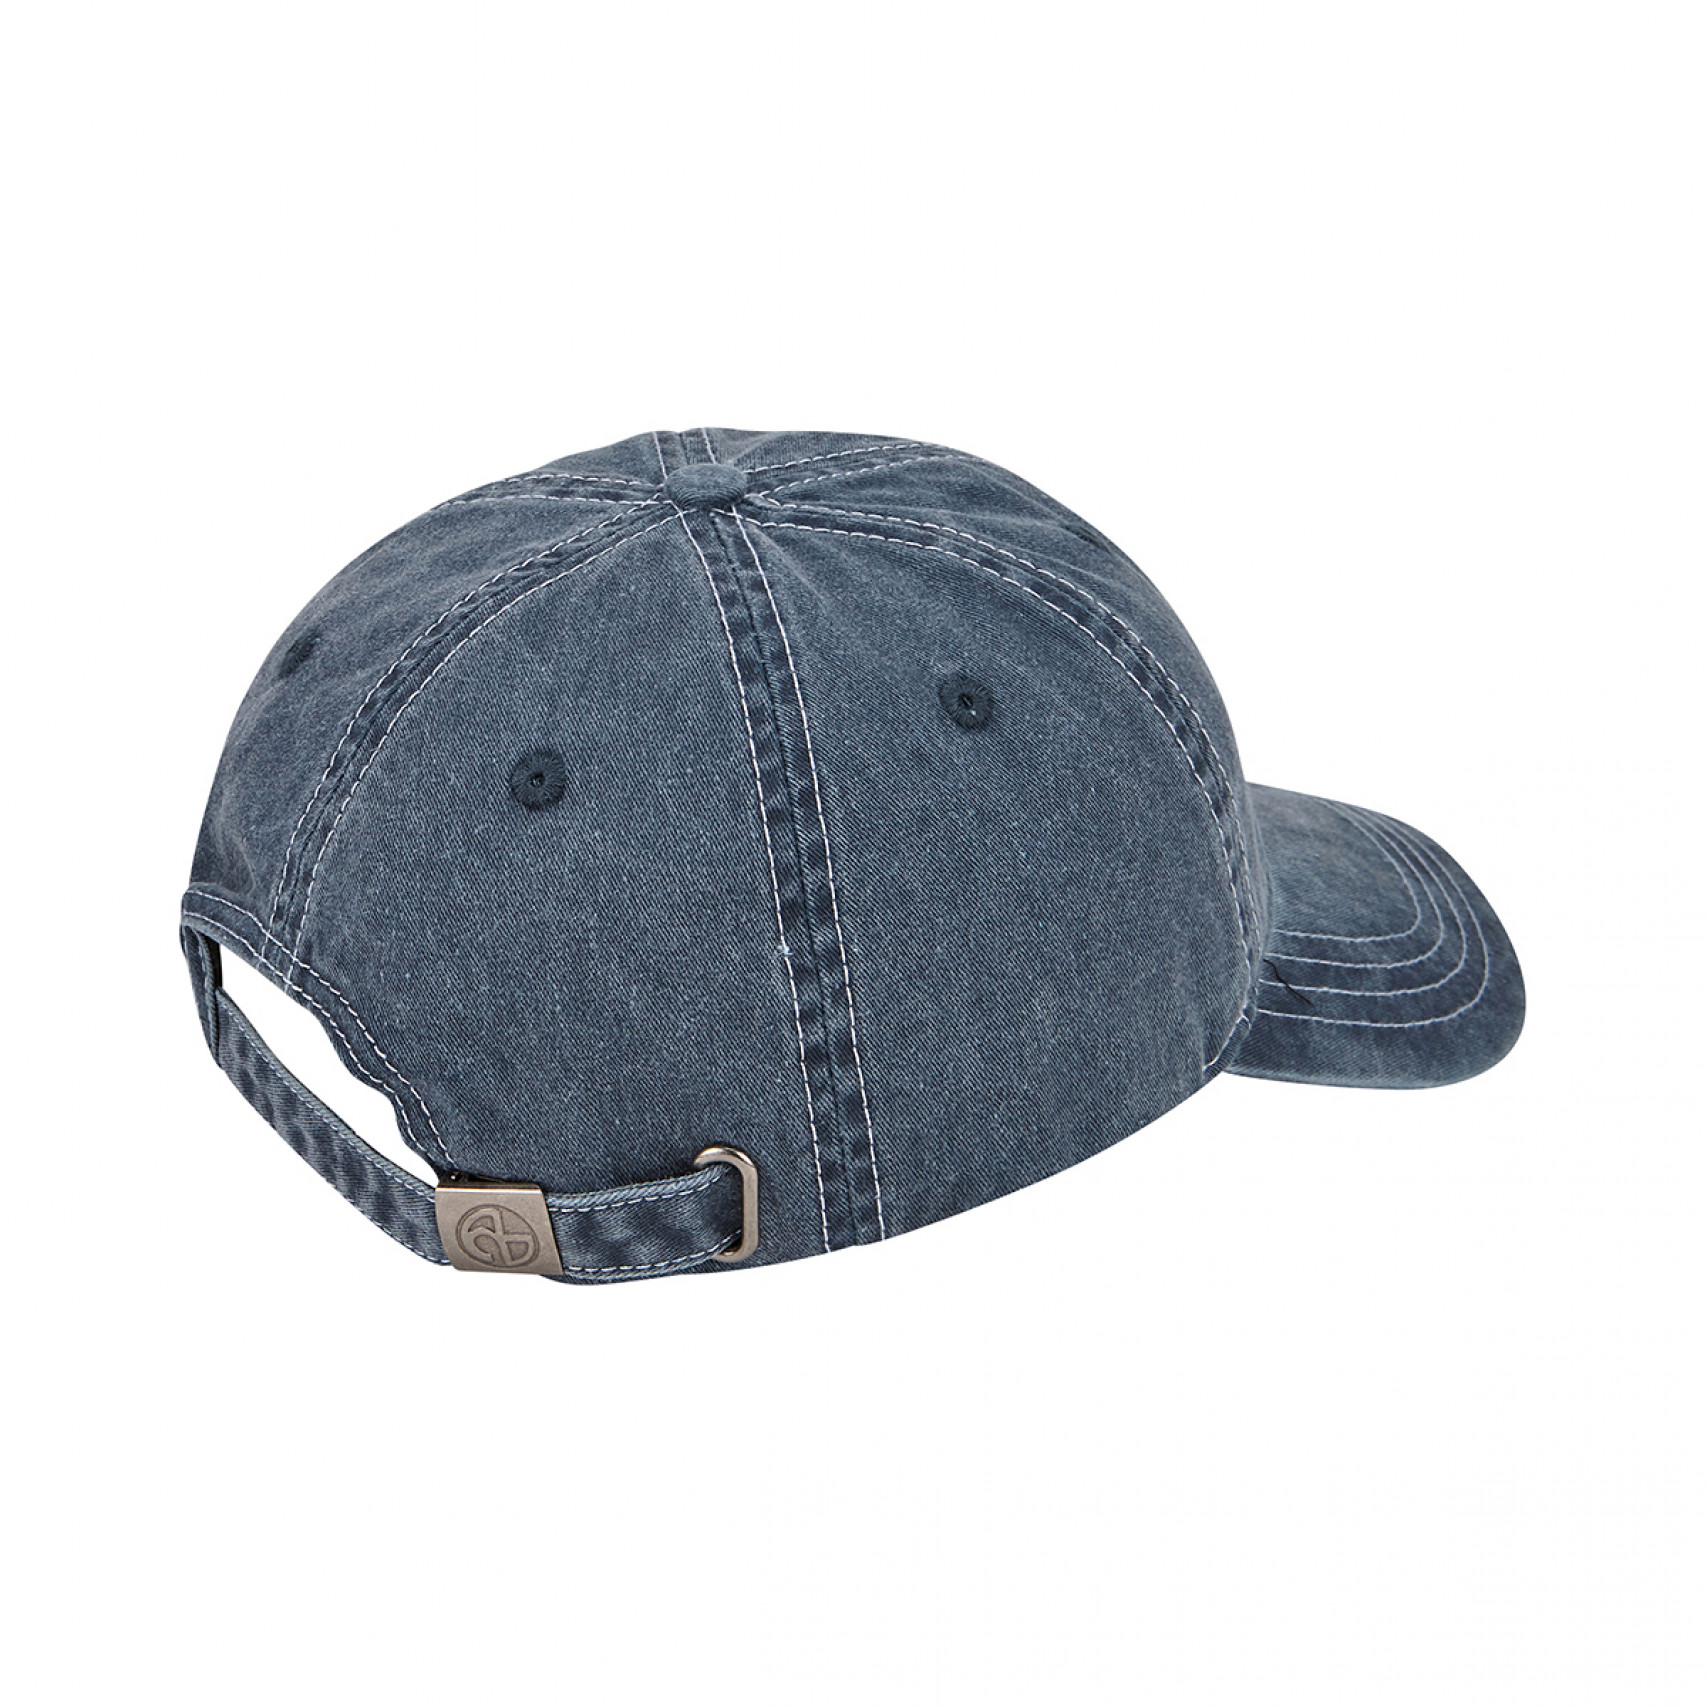 STITCHED BALL CAP - WASHED BLUE